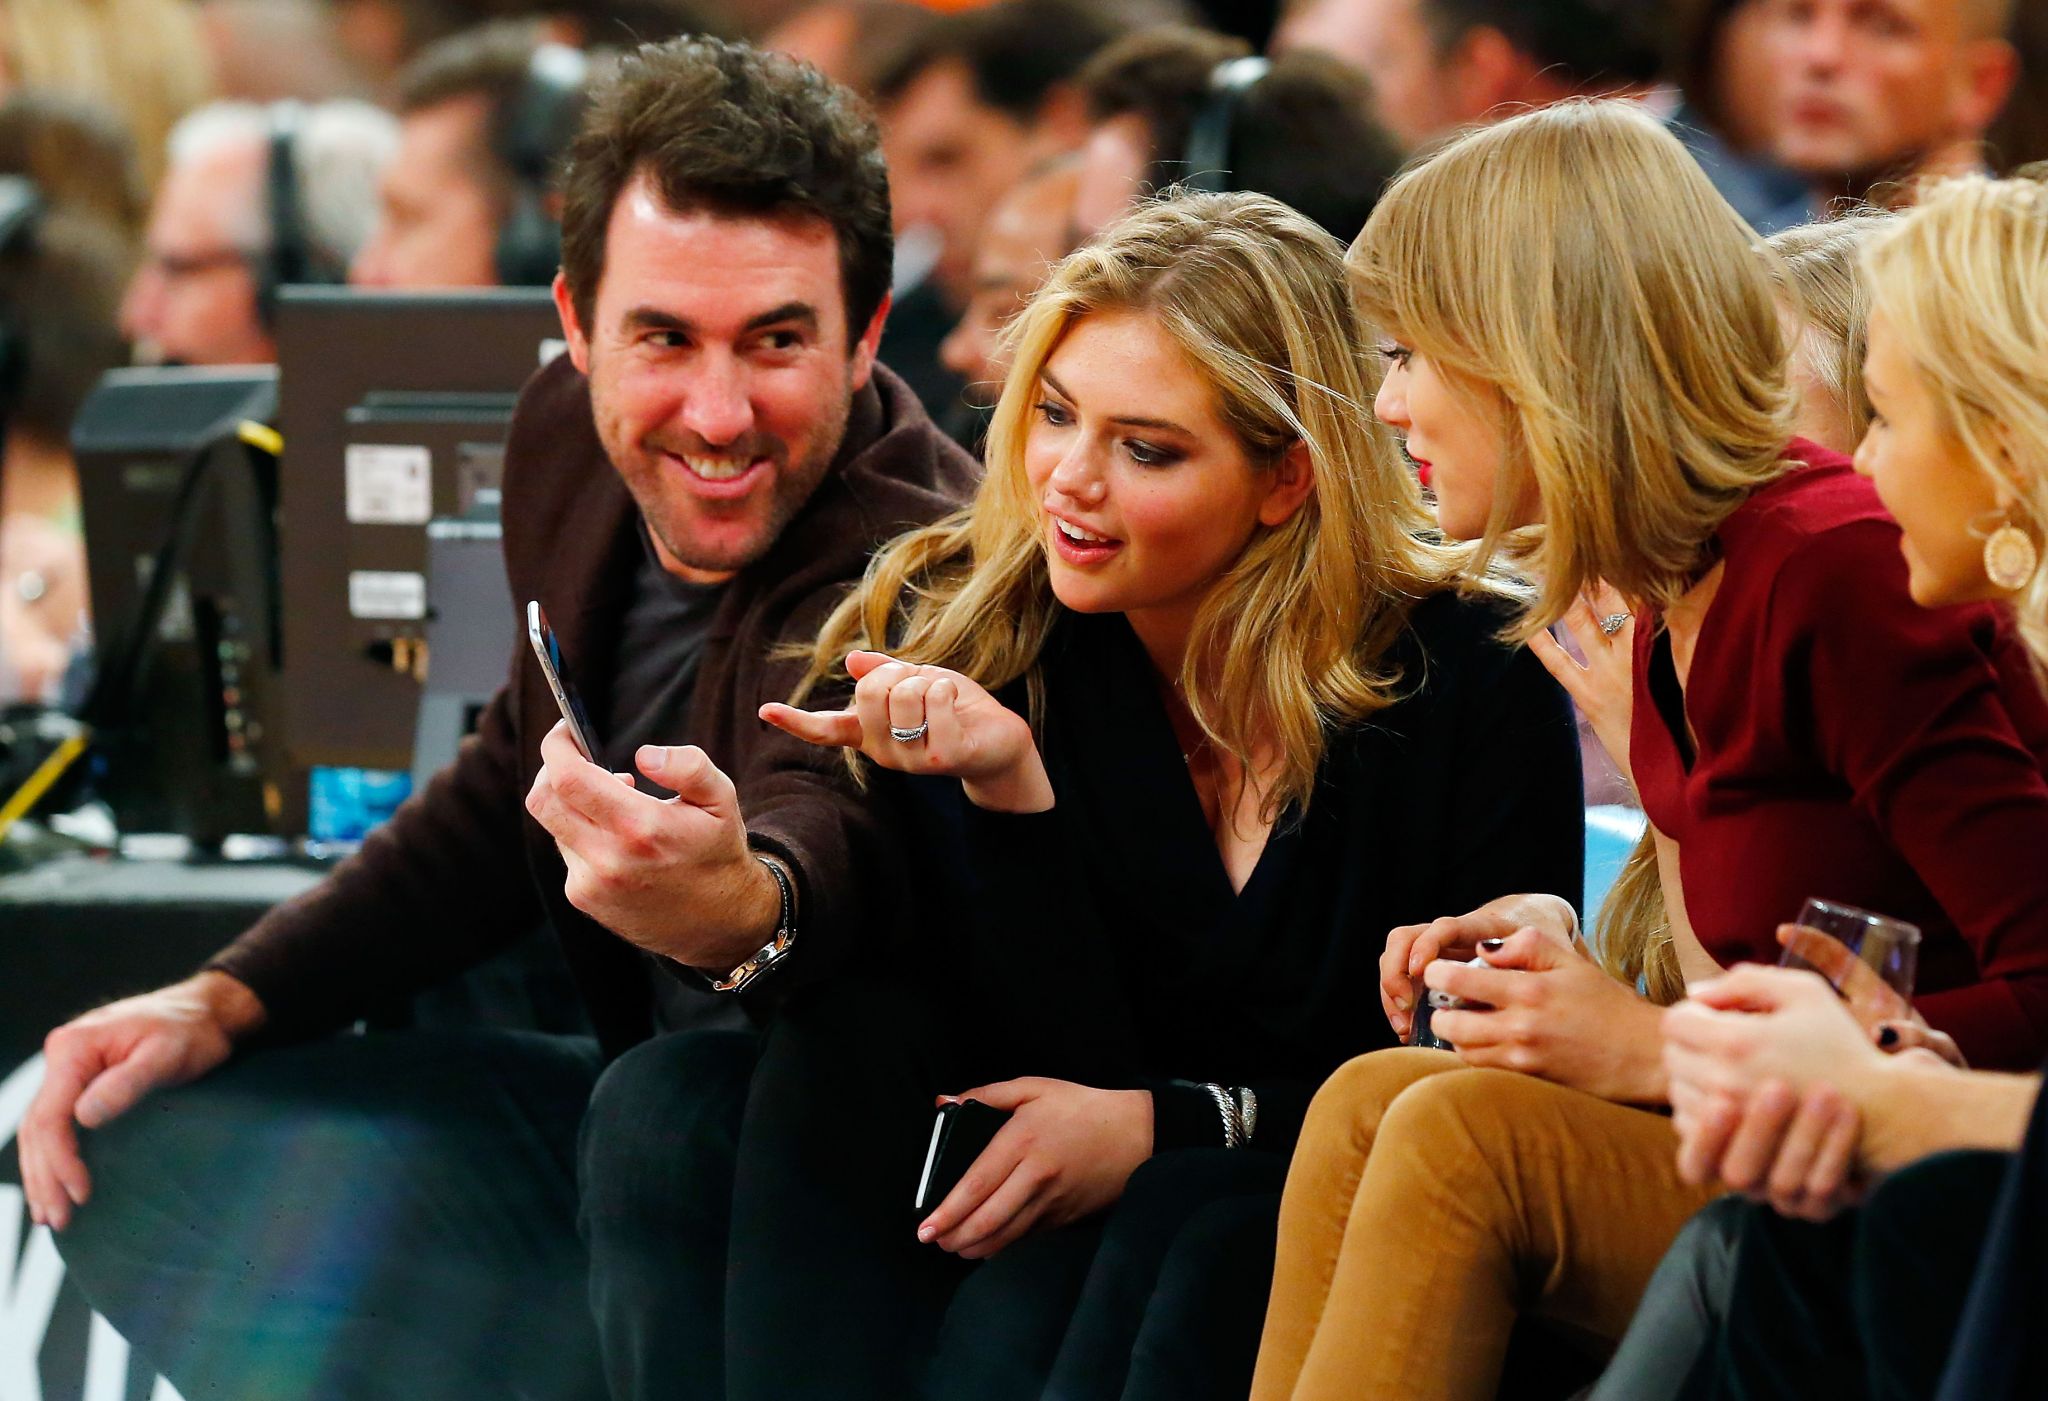 How 'Kate Upton sweater' made it from Astrodome to stores: The